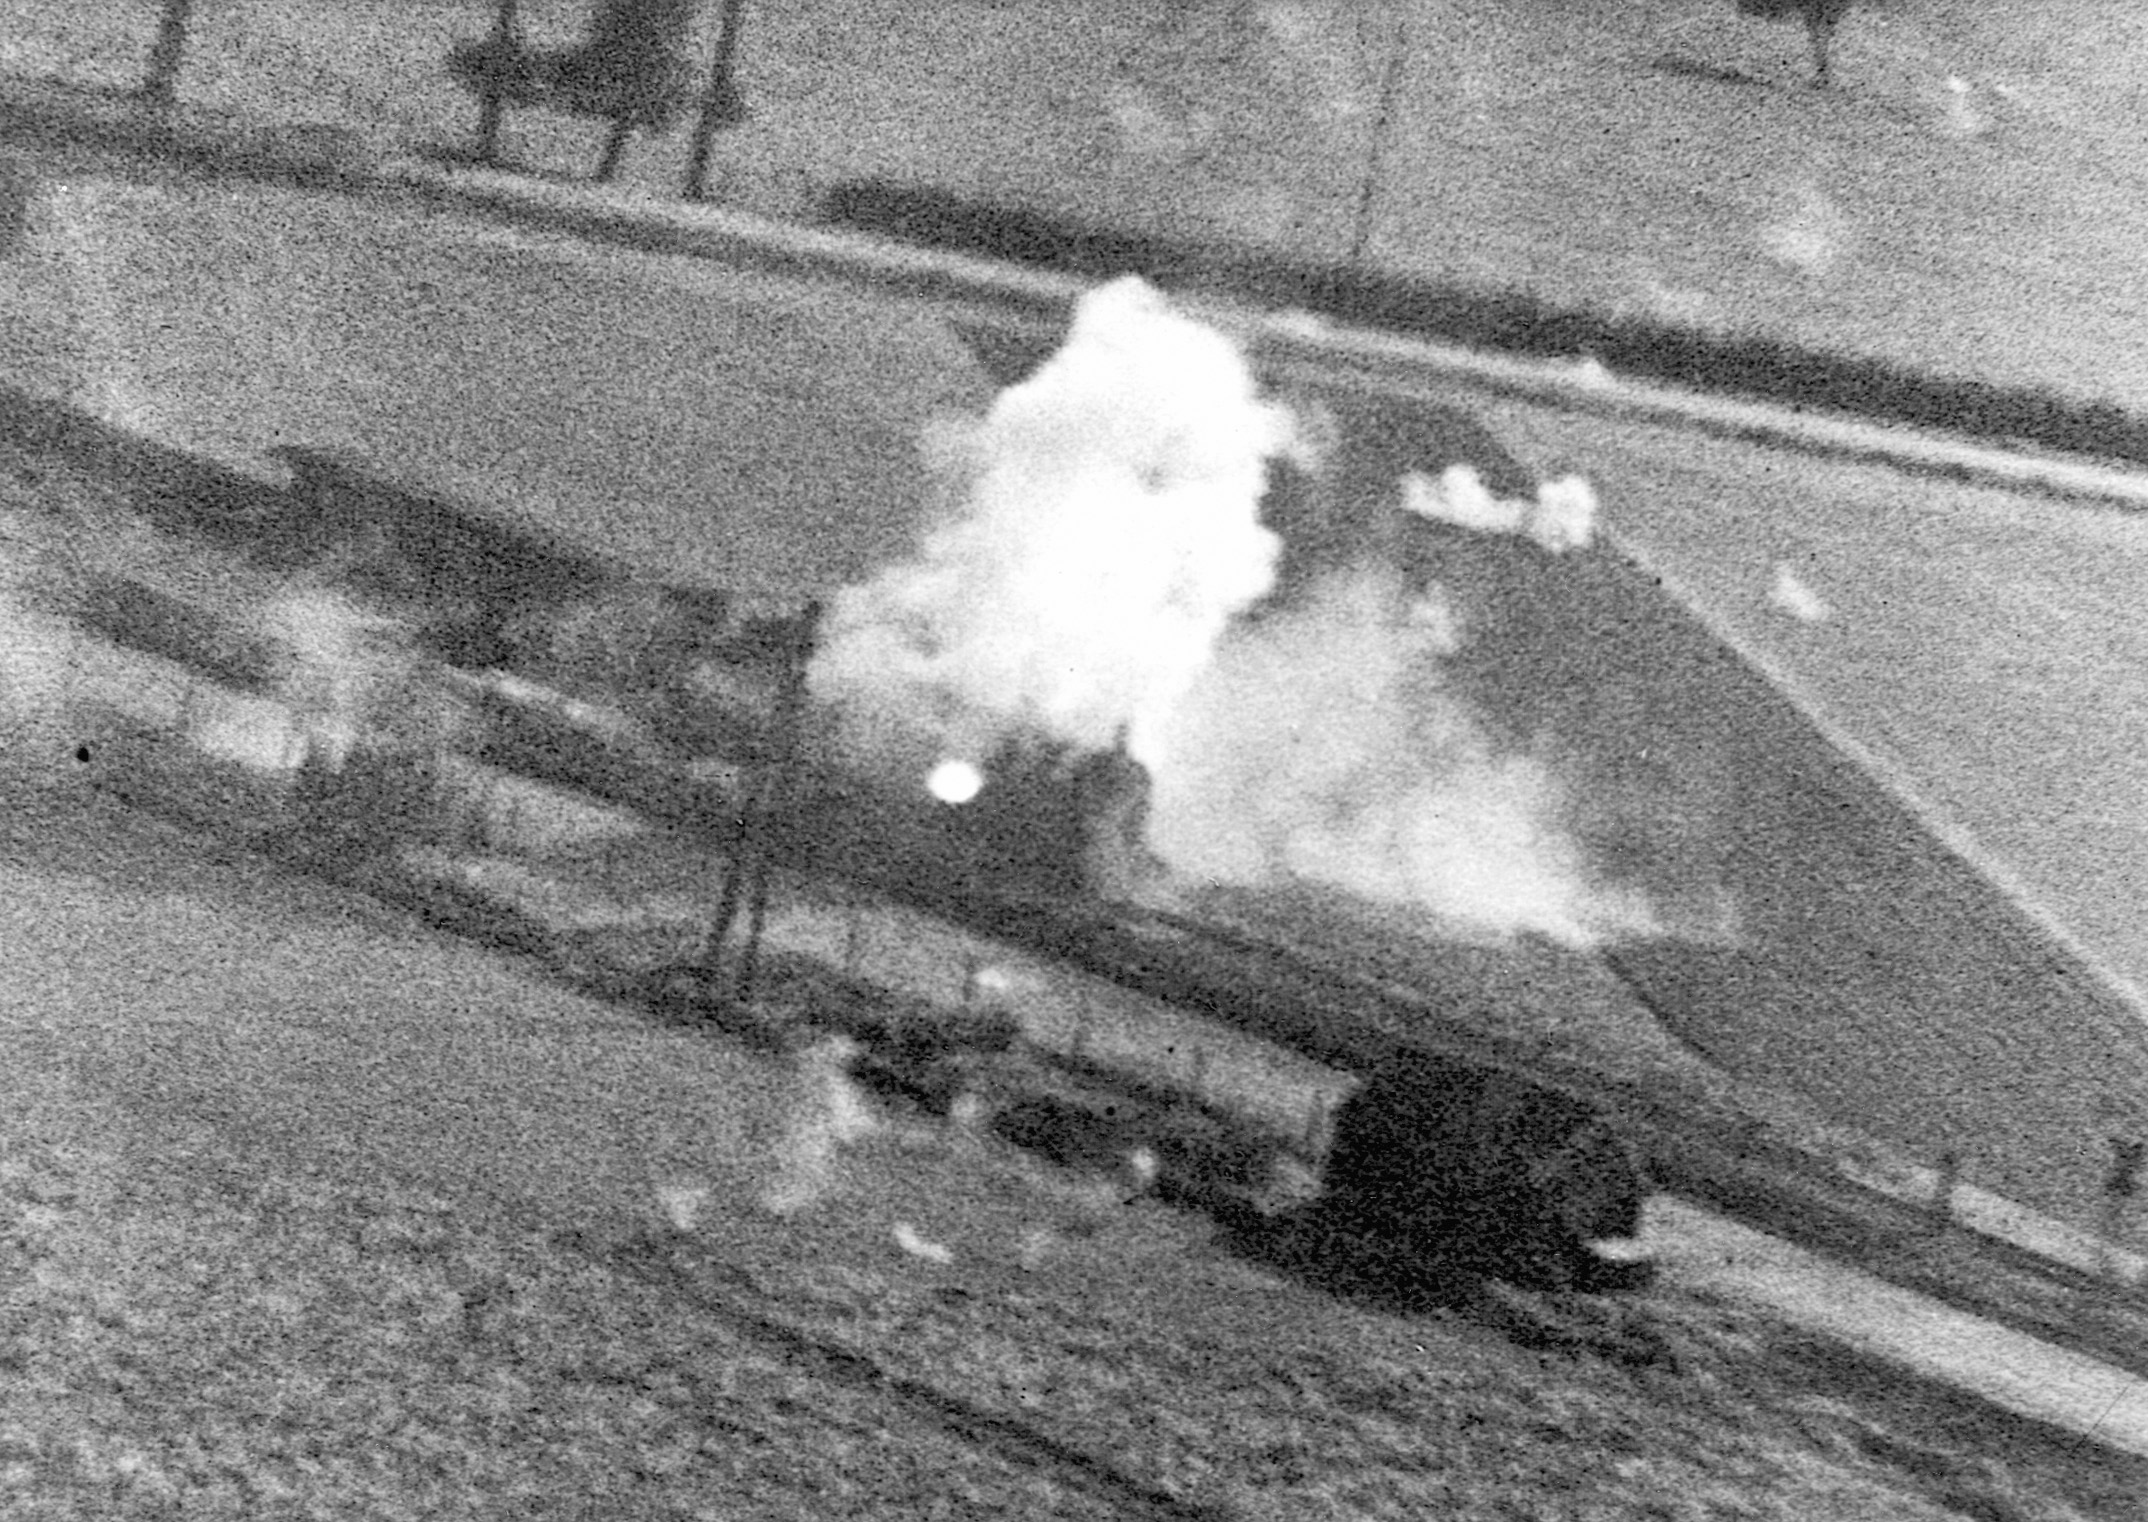 A train engine explodes after being fired on by U.S. fighter planes.